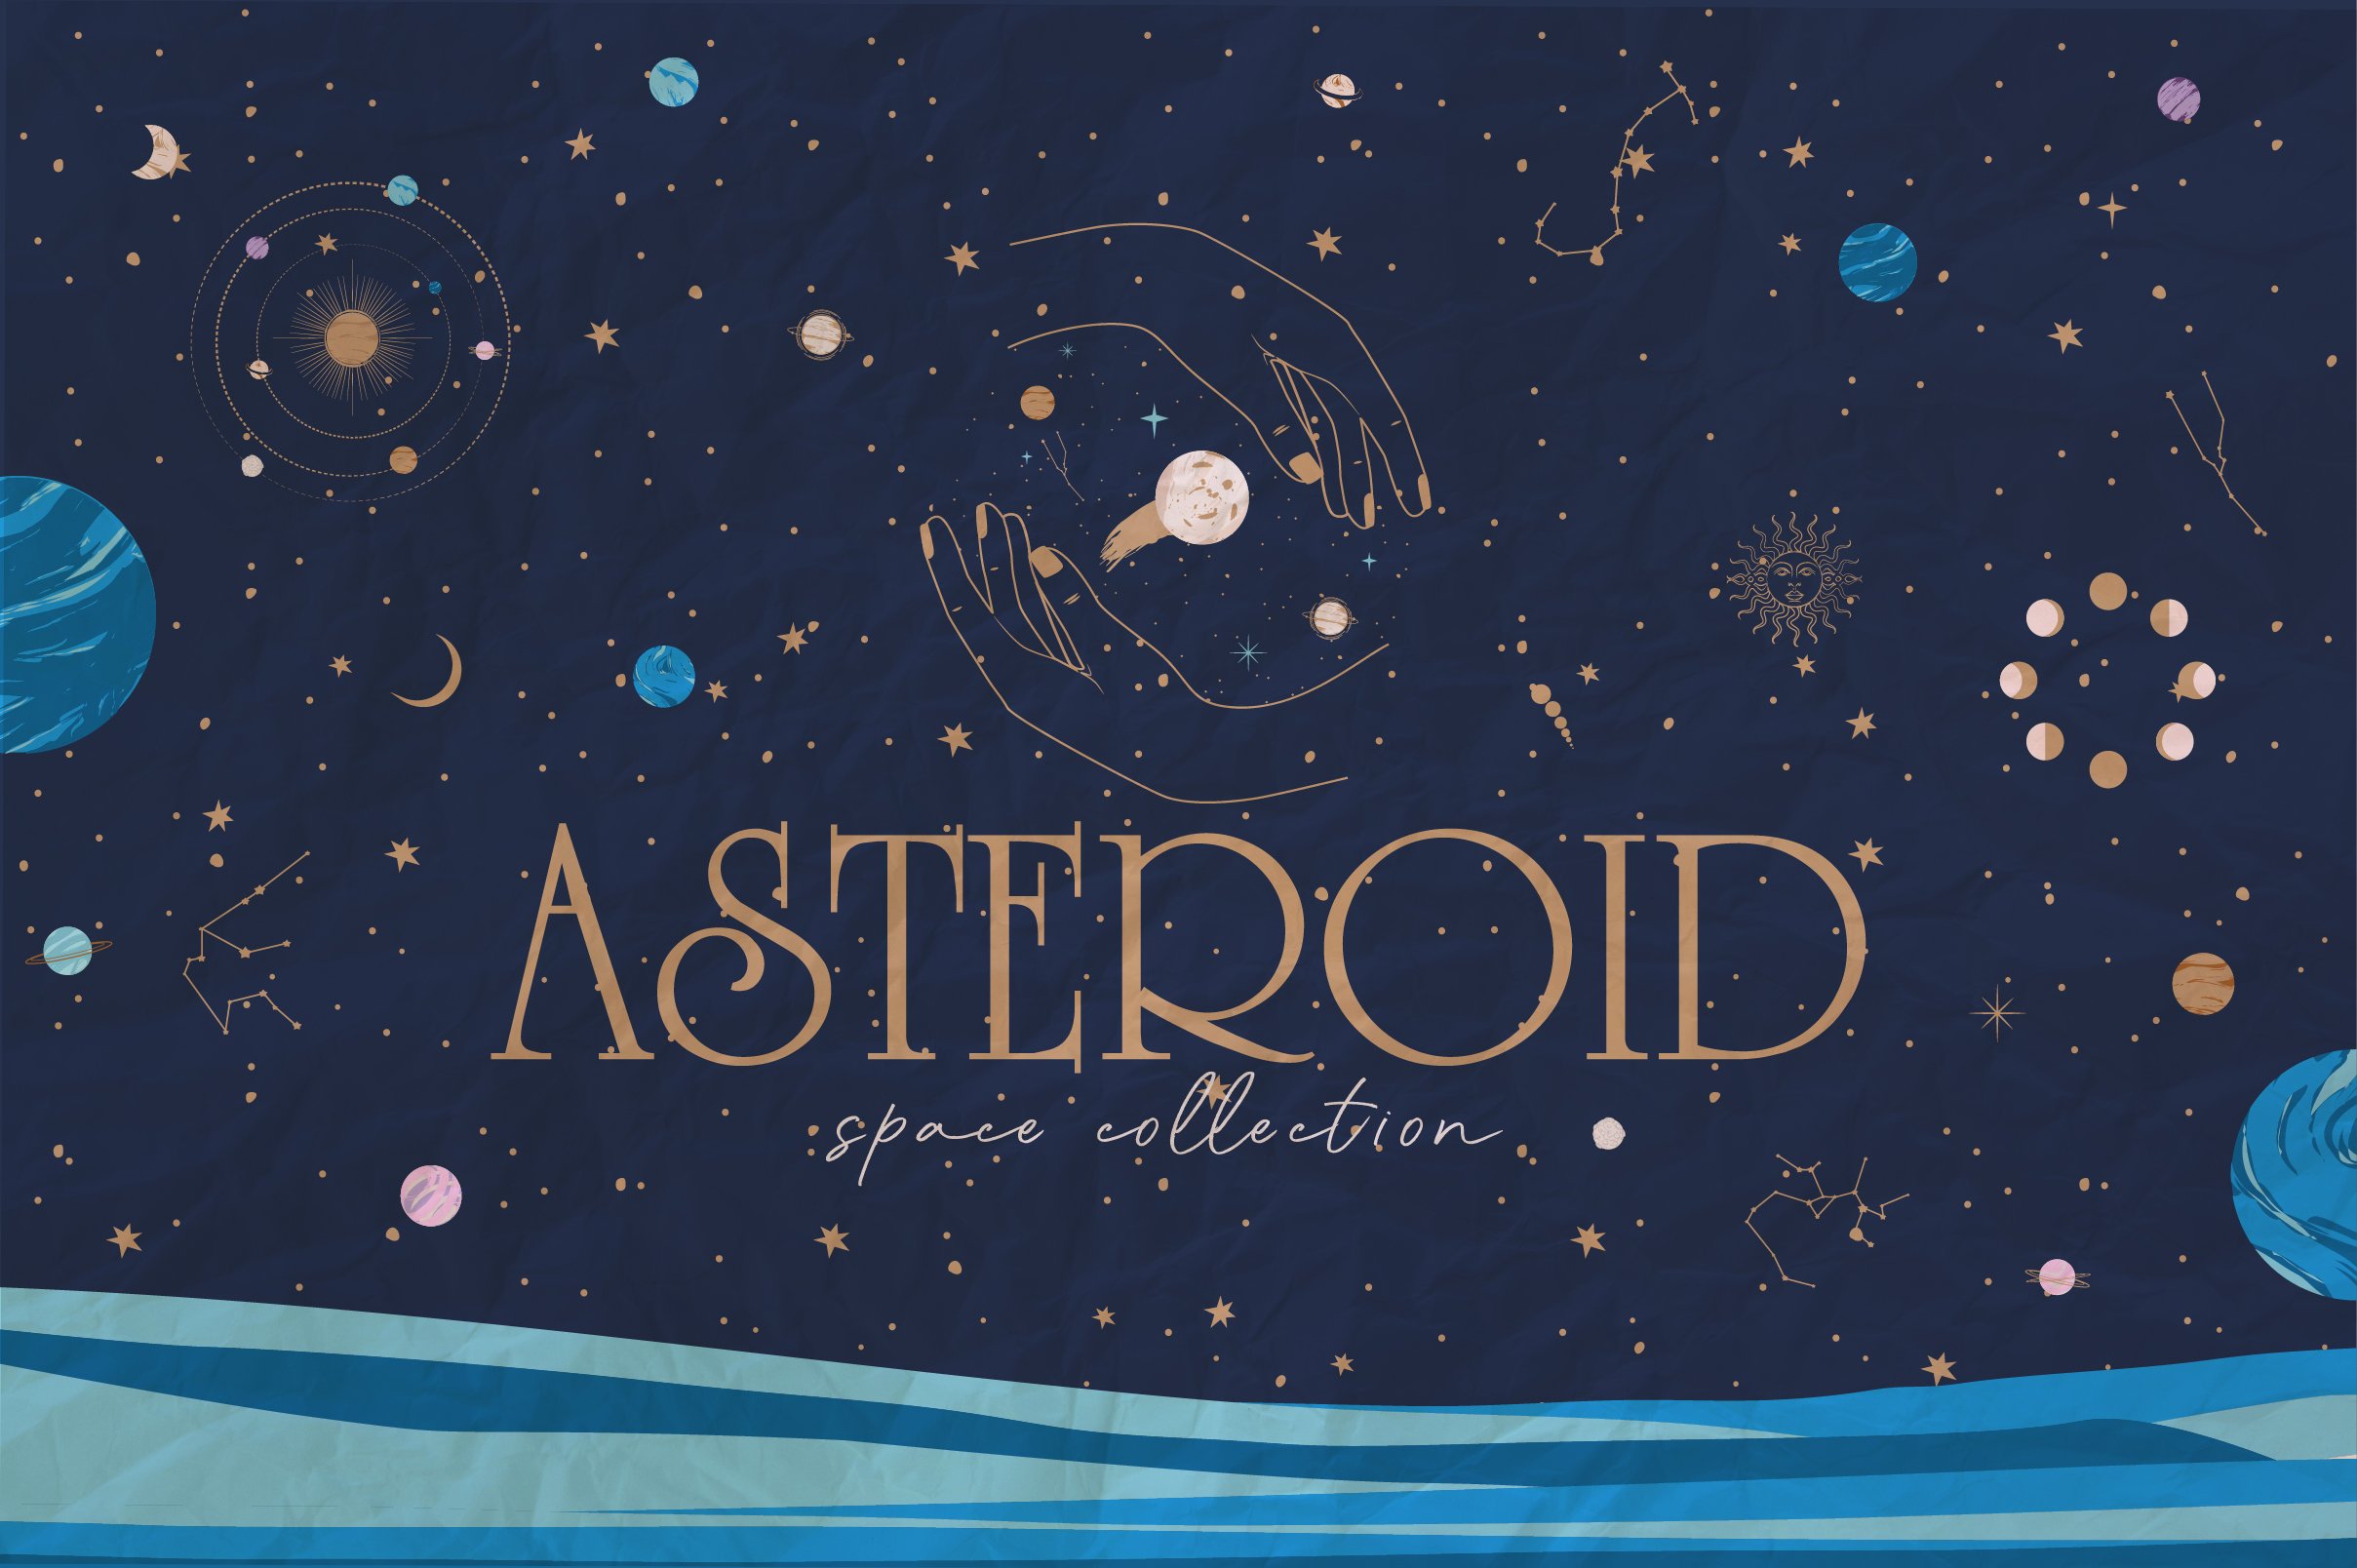 Asteroid / space collection cover image.